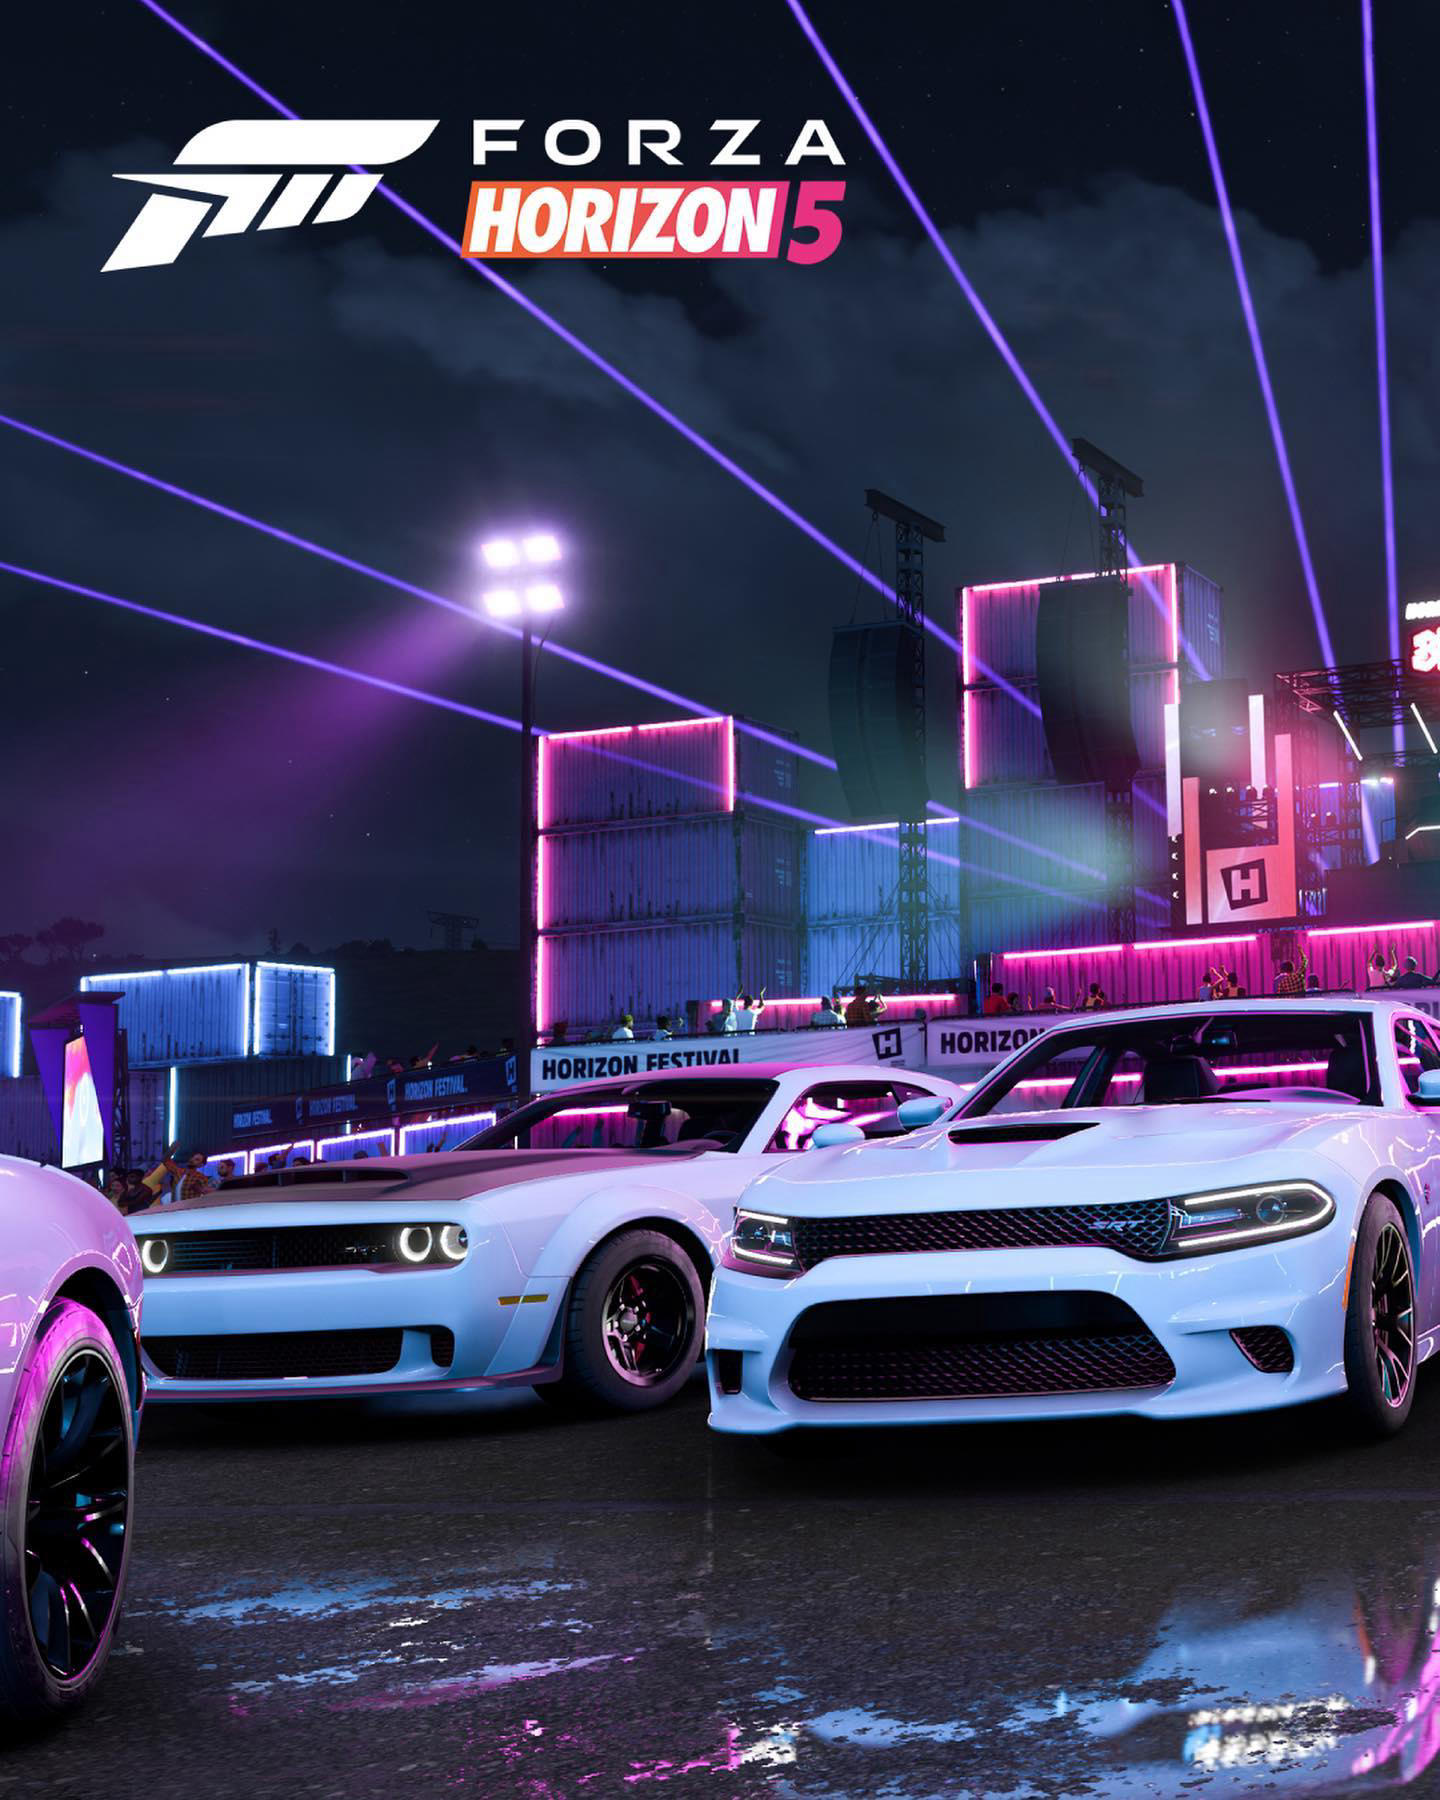 Dodge - New Dodge holiday card from #forzahorizonofficial just dropped